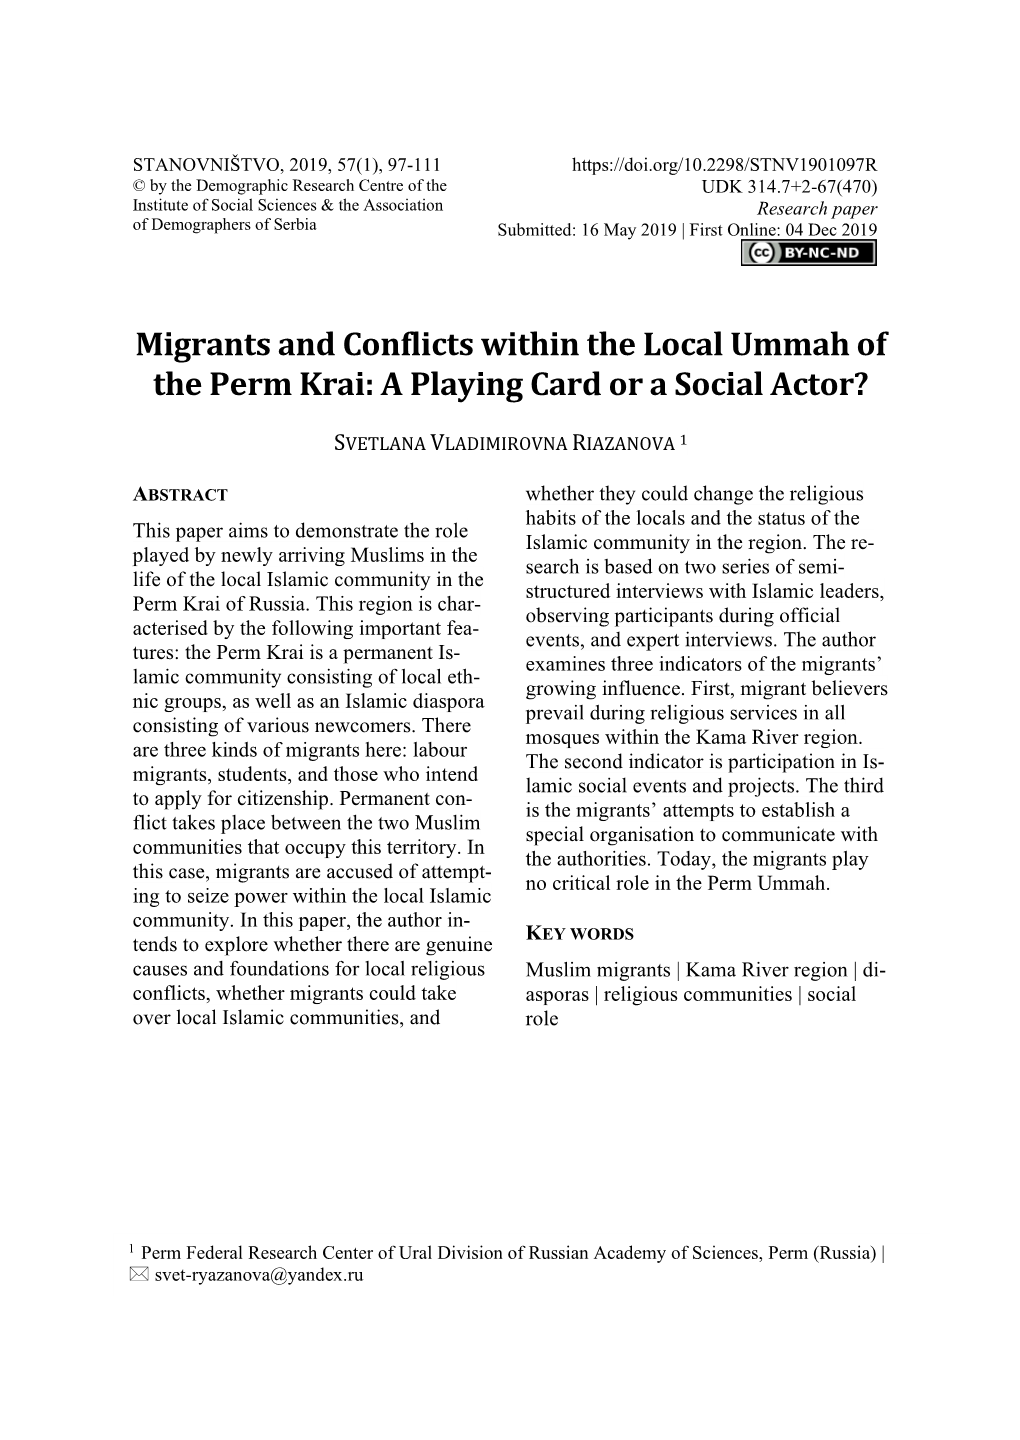 Migrants and Conflicts Within the Local Ummah of the Perm Krai: a Playing Card Or a Social Actor?